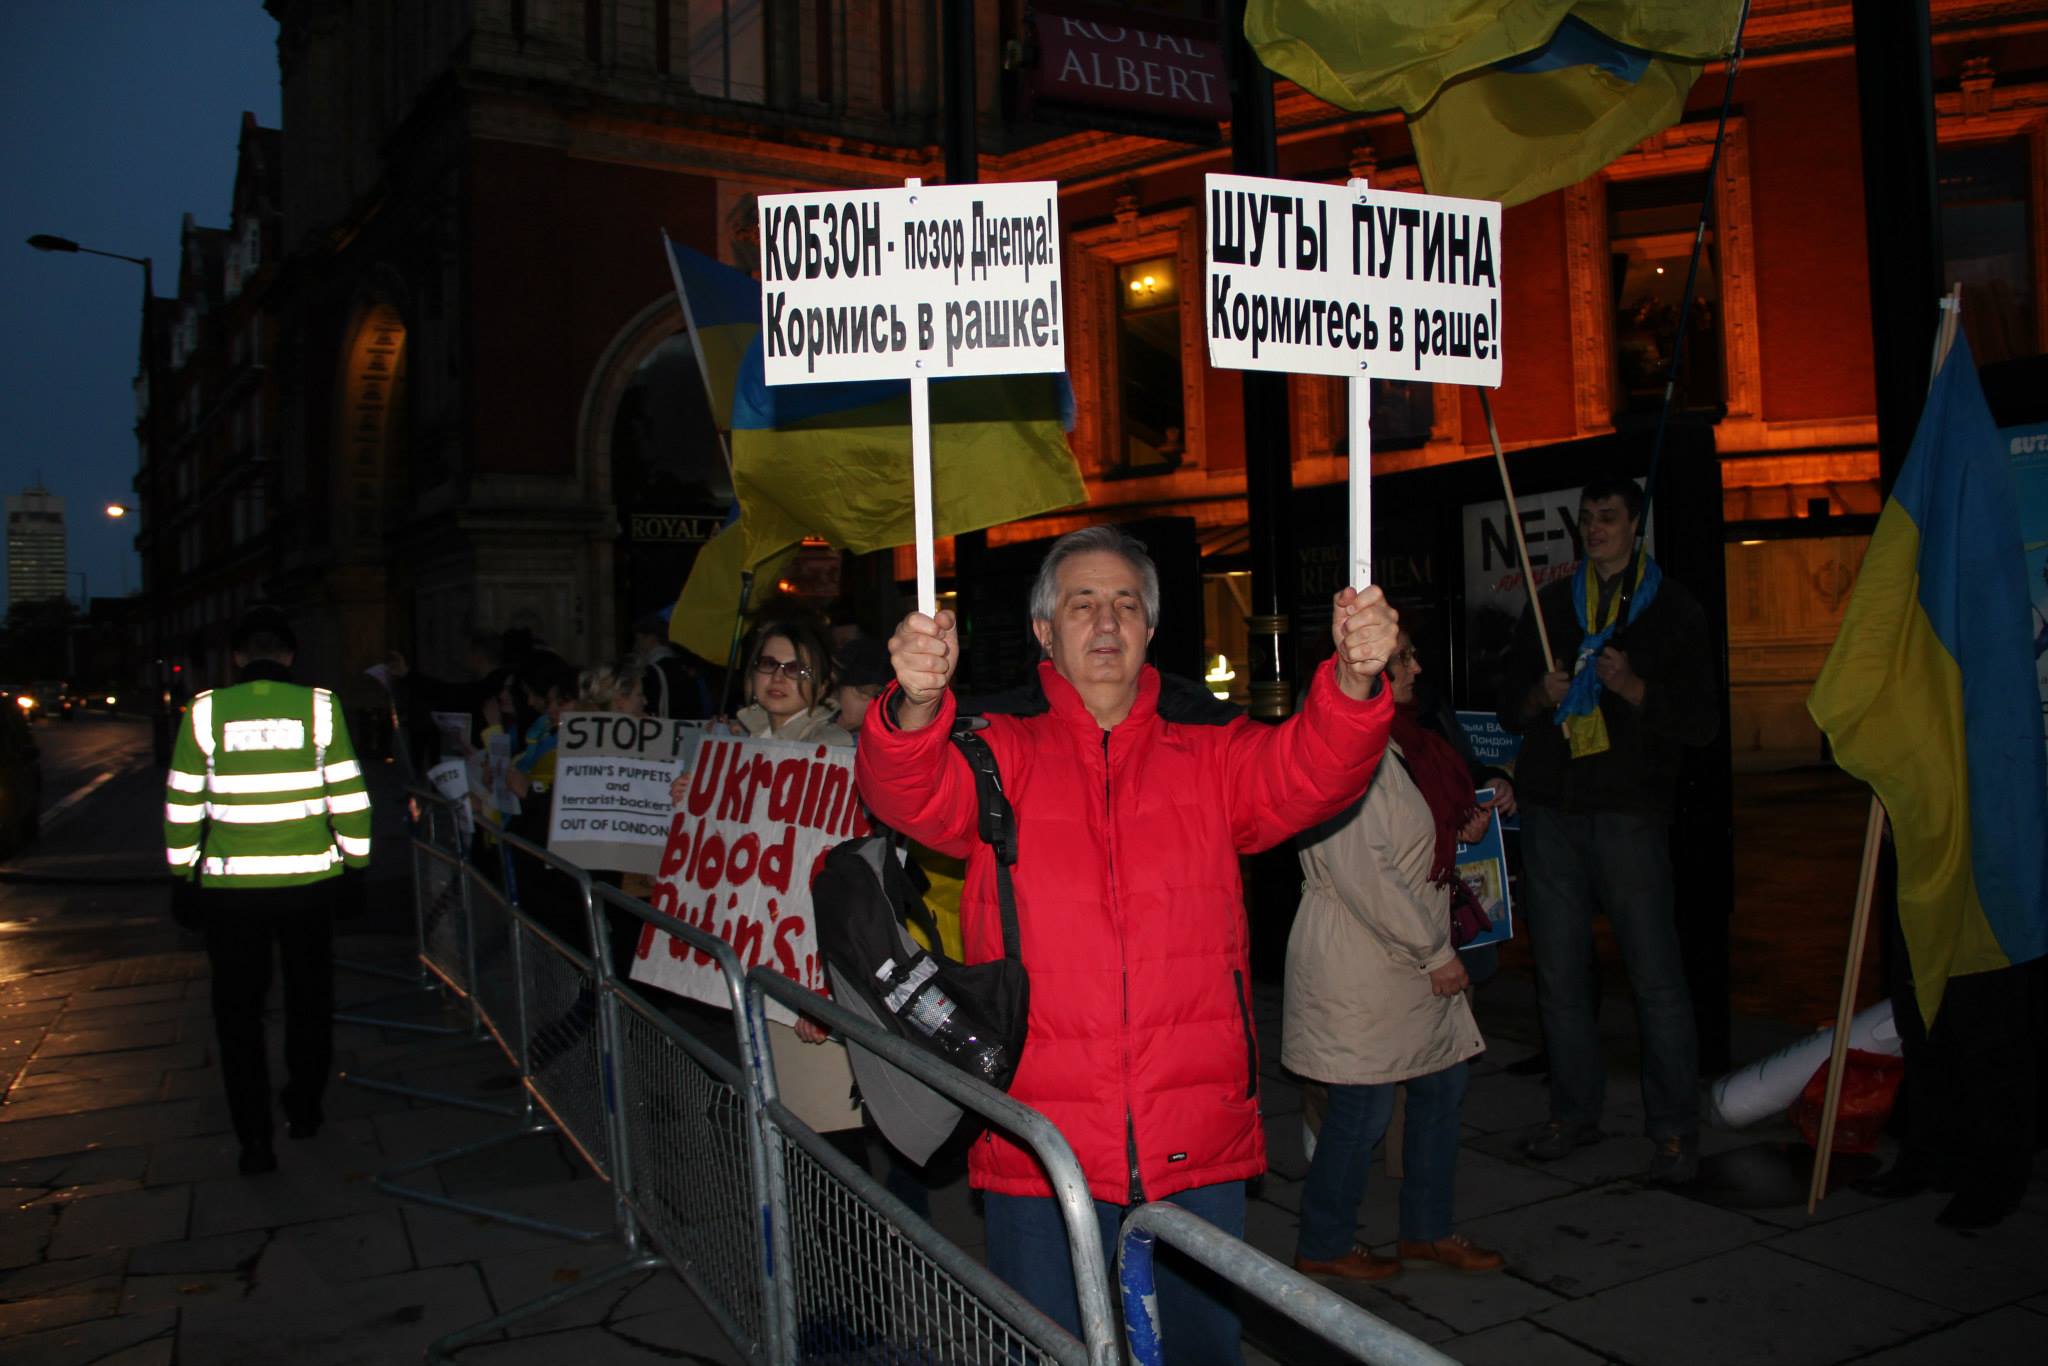 Protest at Royal Albert Hall against Putin’s propagandists and terrorist-backers Kobzon and Valeria ~~